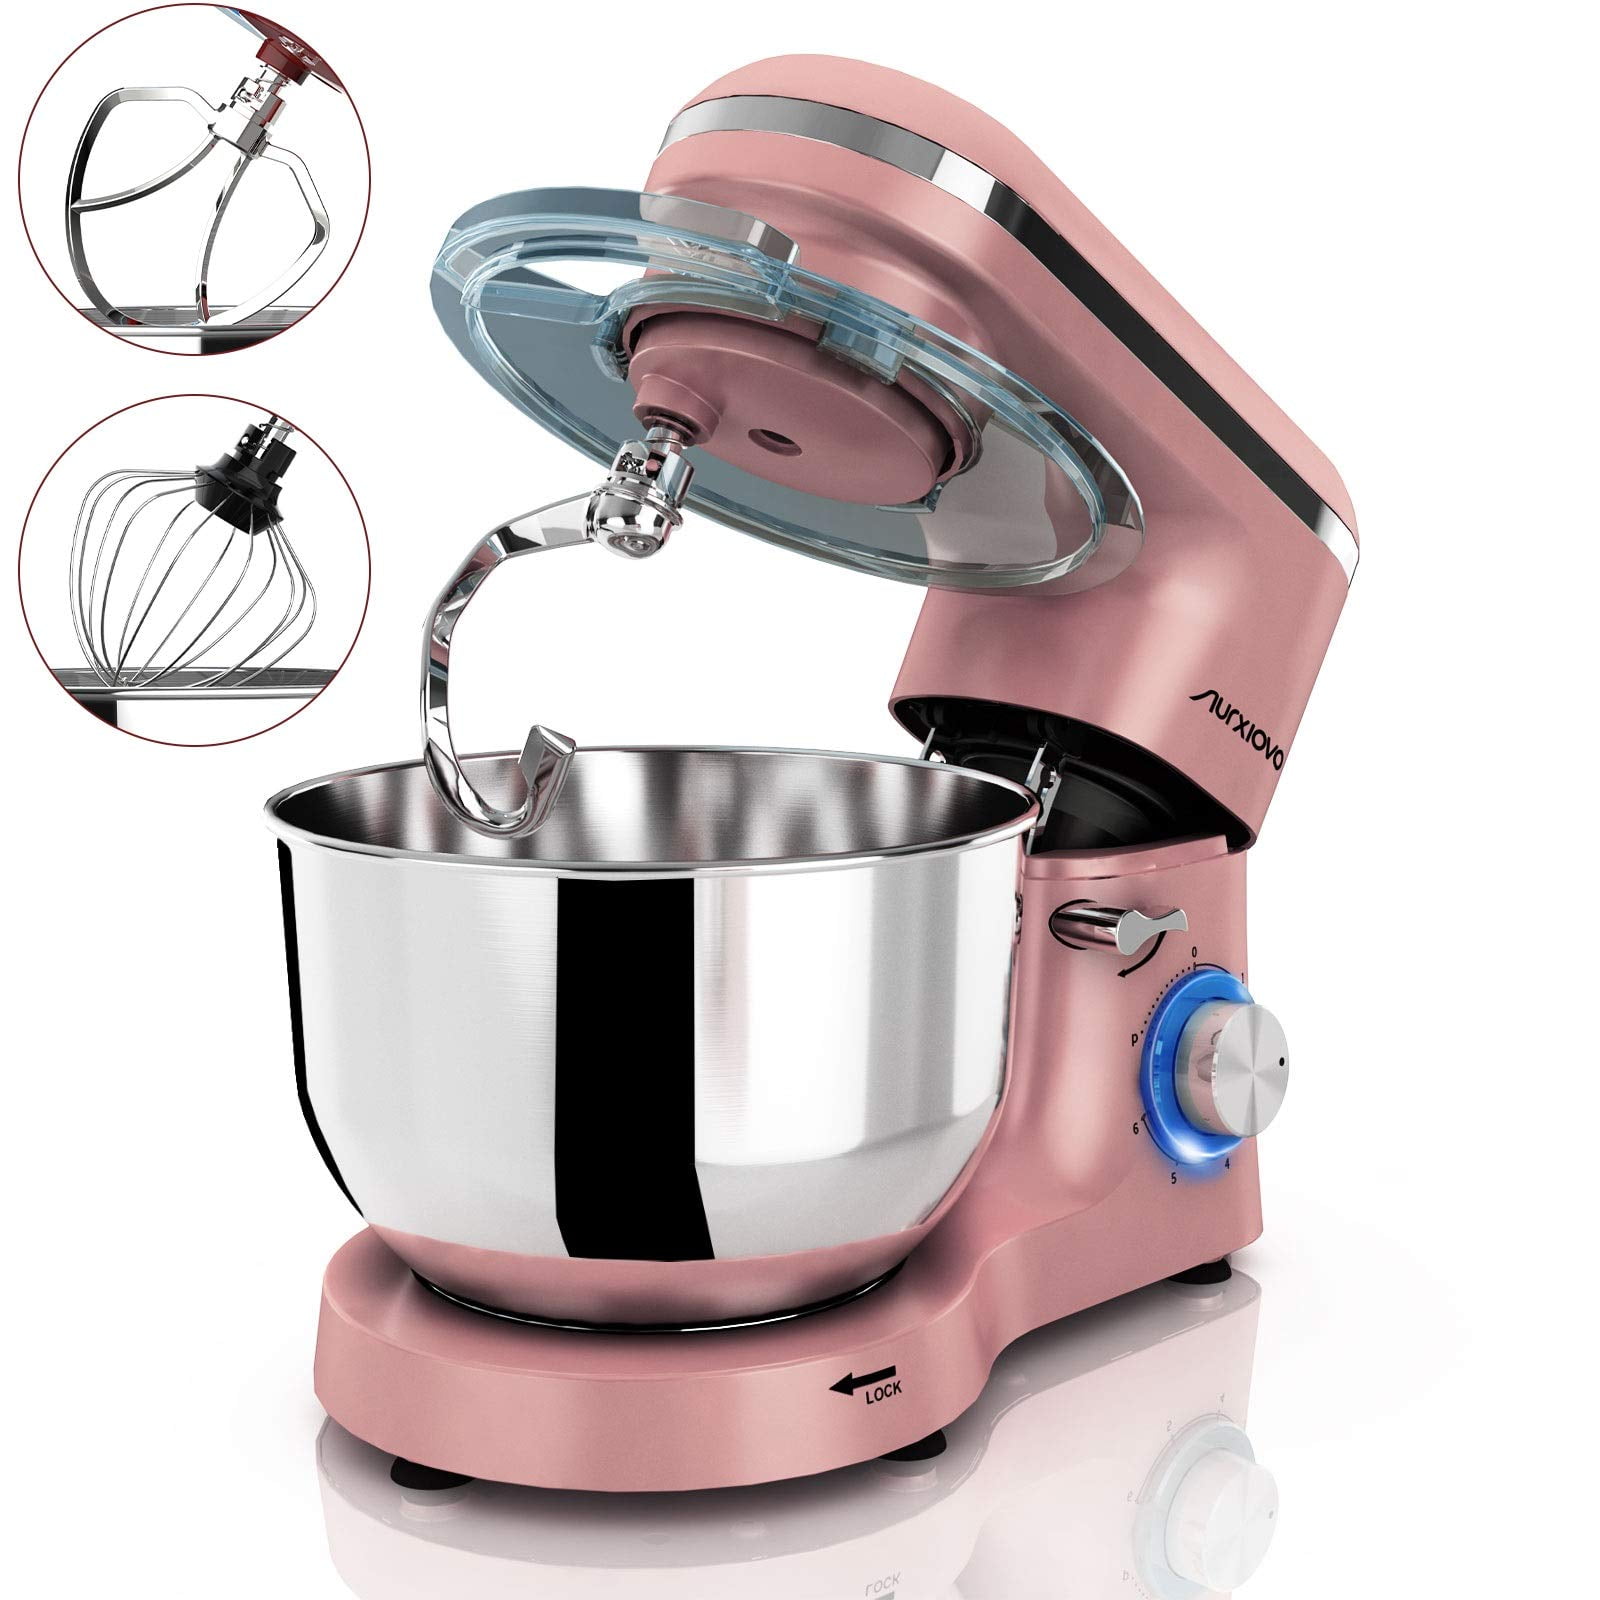 6.5-QT Stand Mixer,660W 6-Speed Electric Tilt-Head Kitchen Mixer Cake Mixer with Stainless Steel Bowl,Dough Hook Black Whisk & Beater,Dough Mixer for Baking 